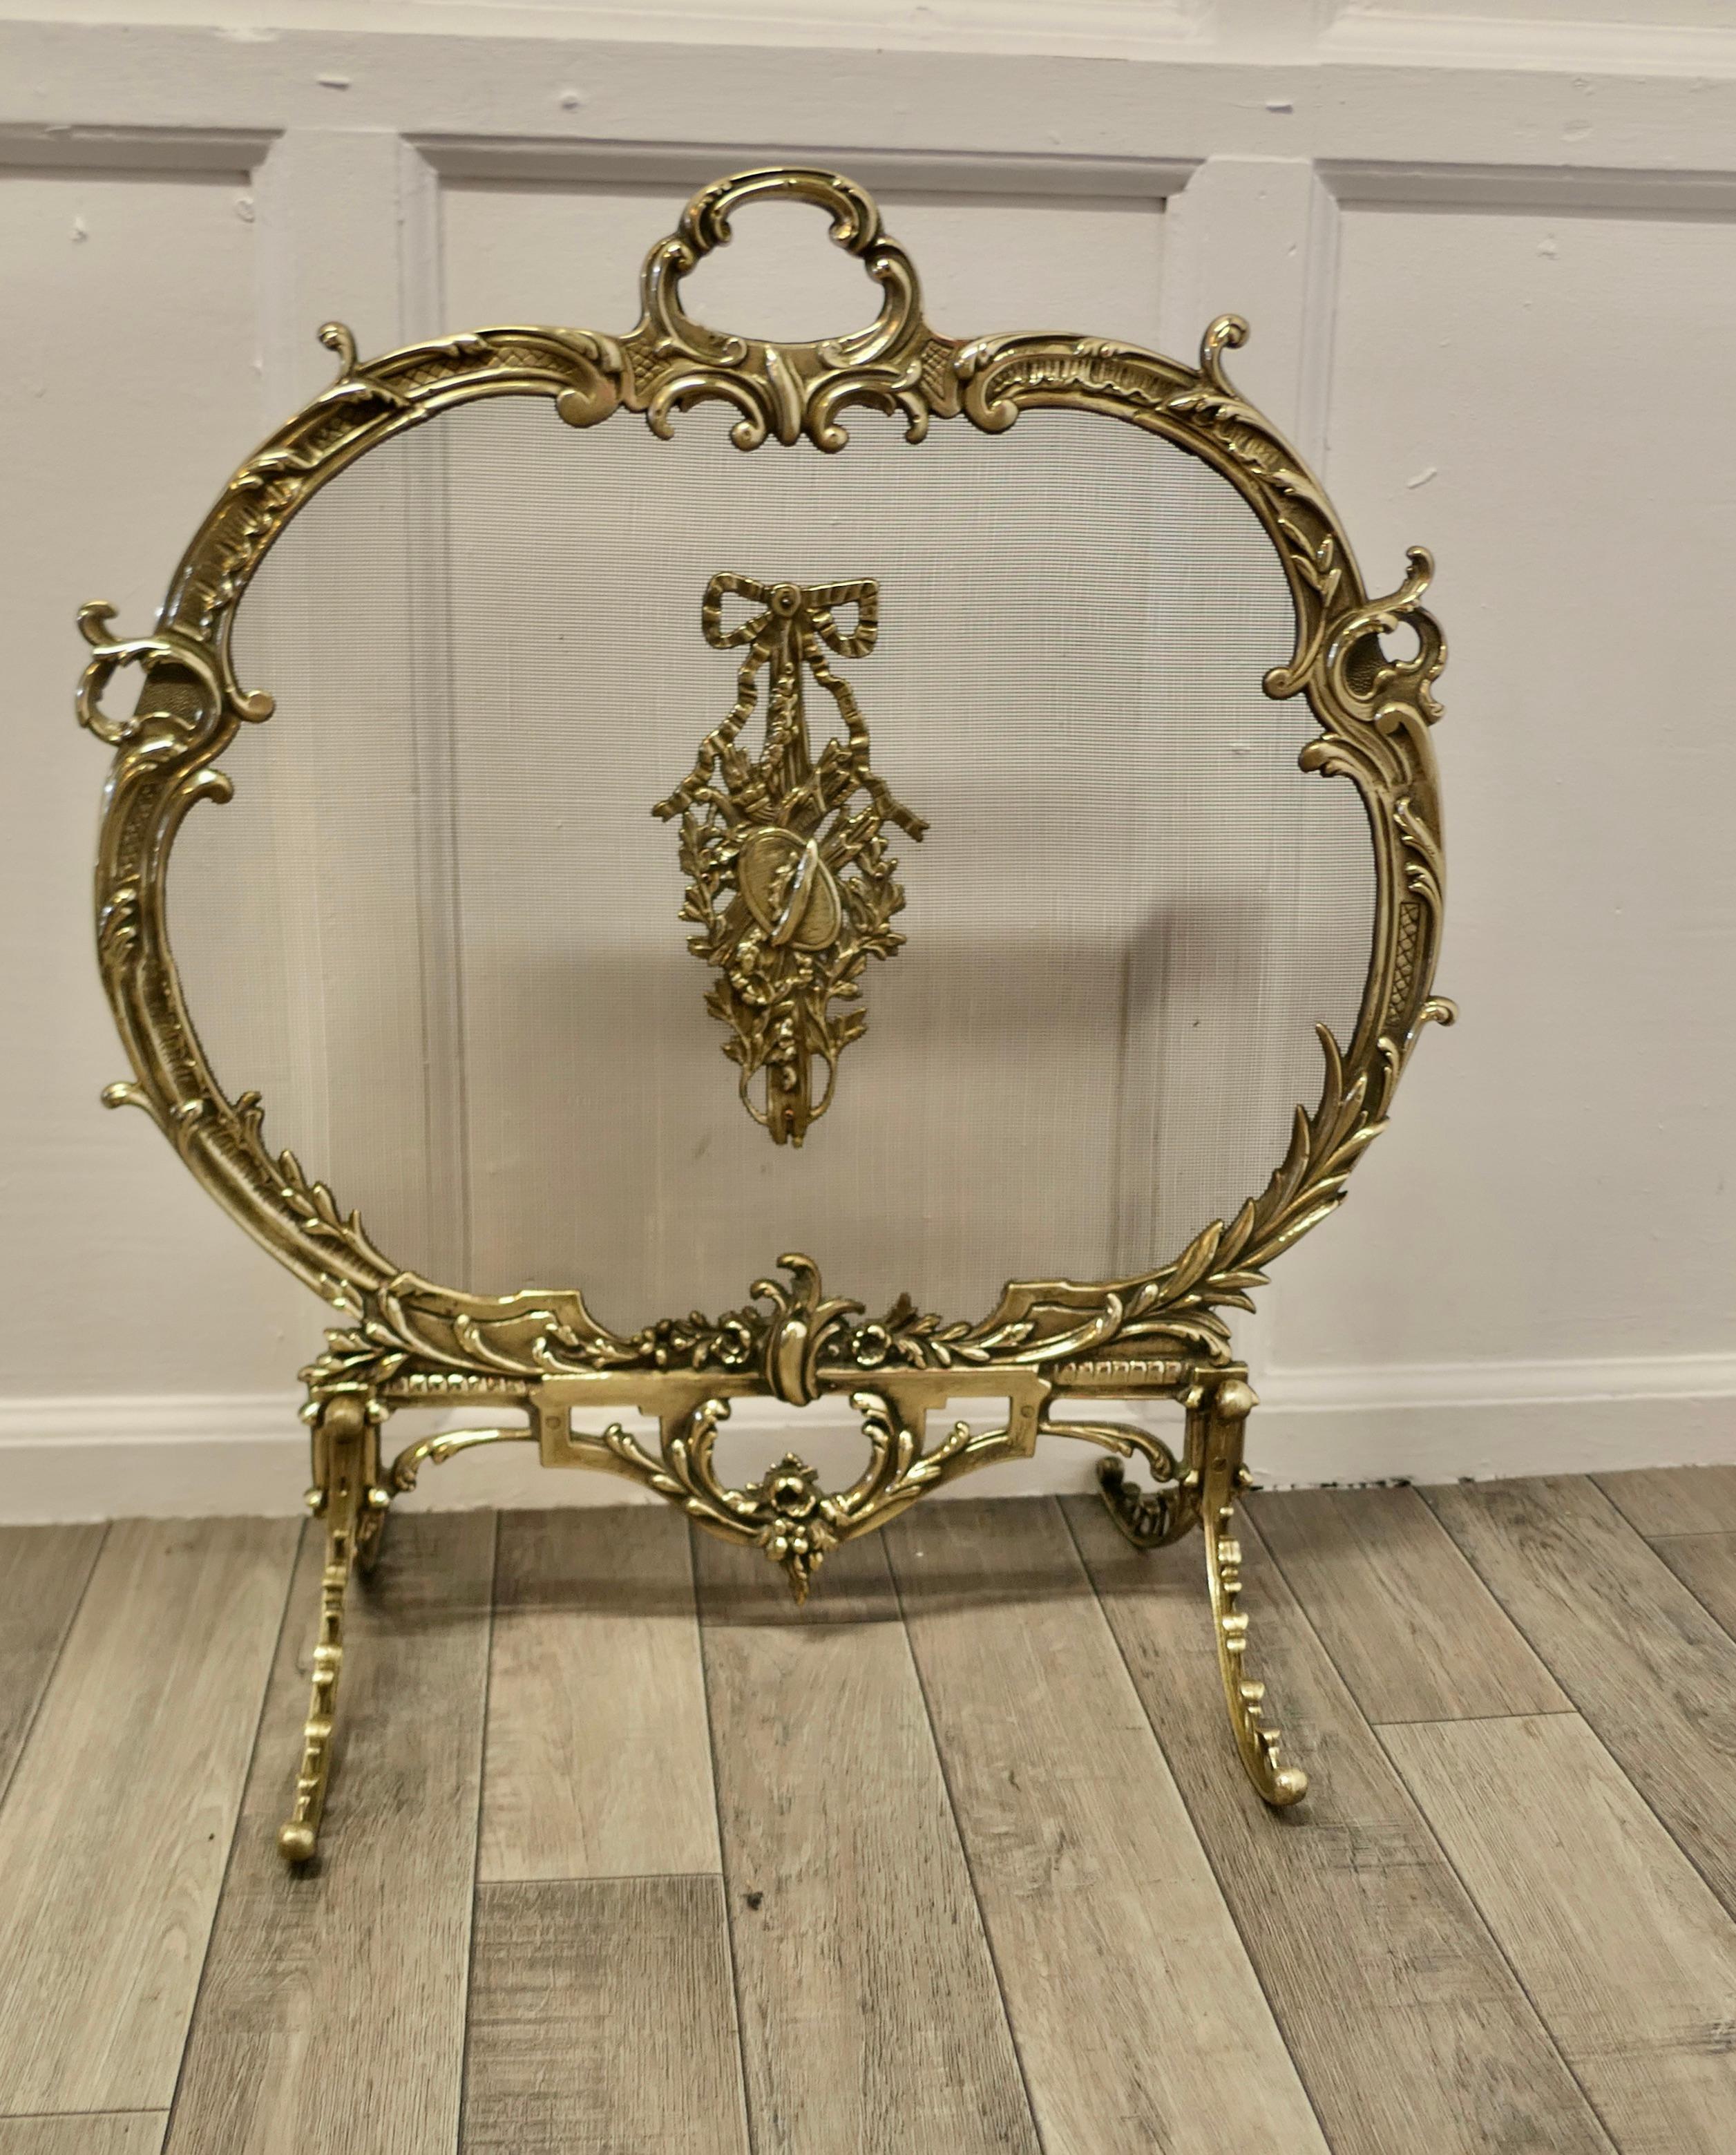 A Superb French Brass Rococo Fire Guard, Screen

The Fire guard is a superb quality piece, it is Oval in shape with a carrying handle to the top. The frame is very decorative ormolu and it has a fine mesh screen incorporated to stop any damage to